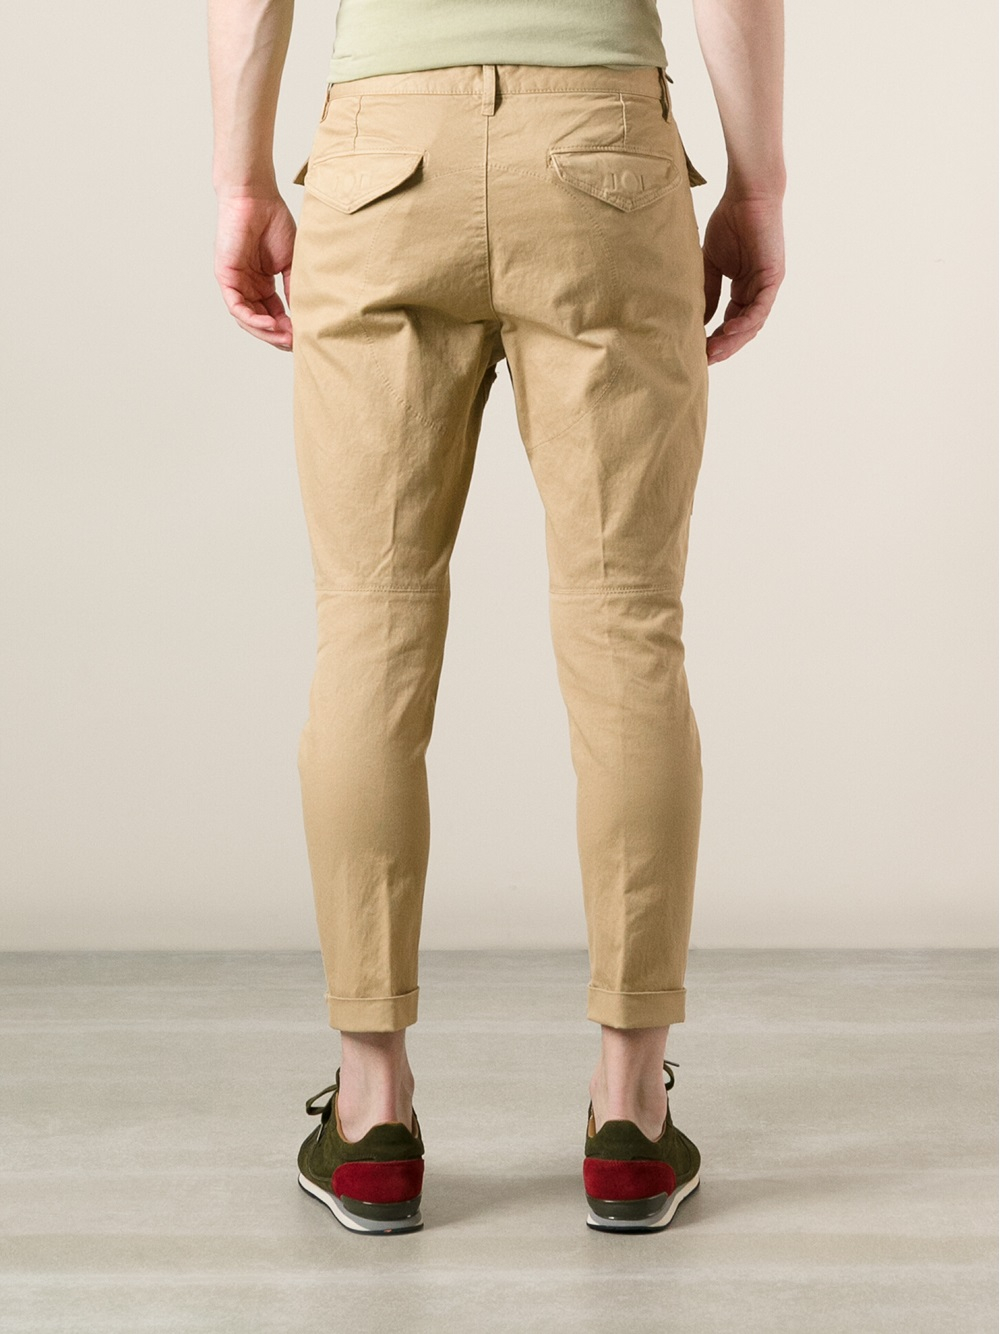 DSquared² Cropped Skinny Chinos in Natural for Men - Lyst